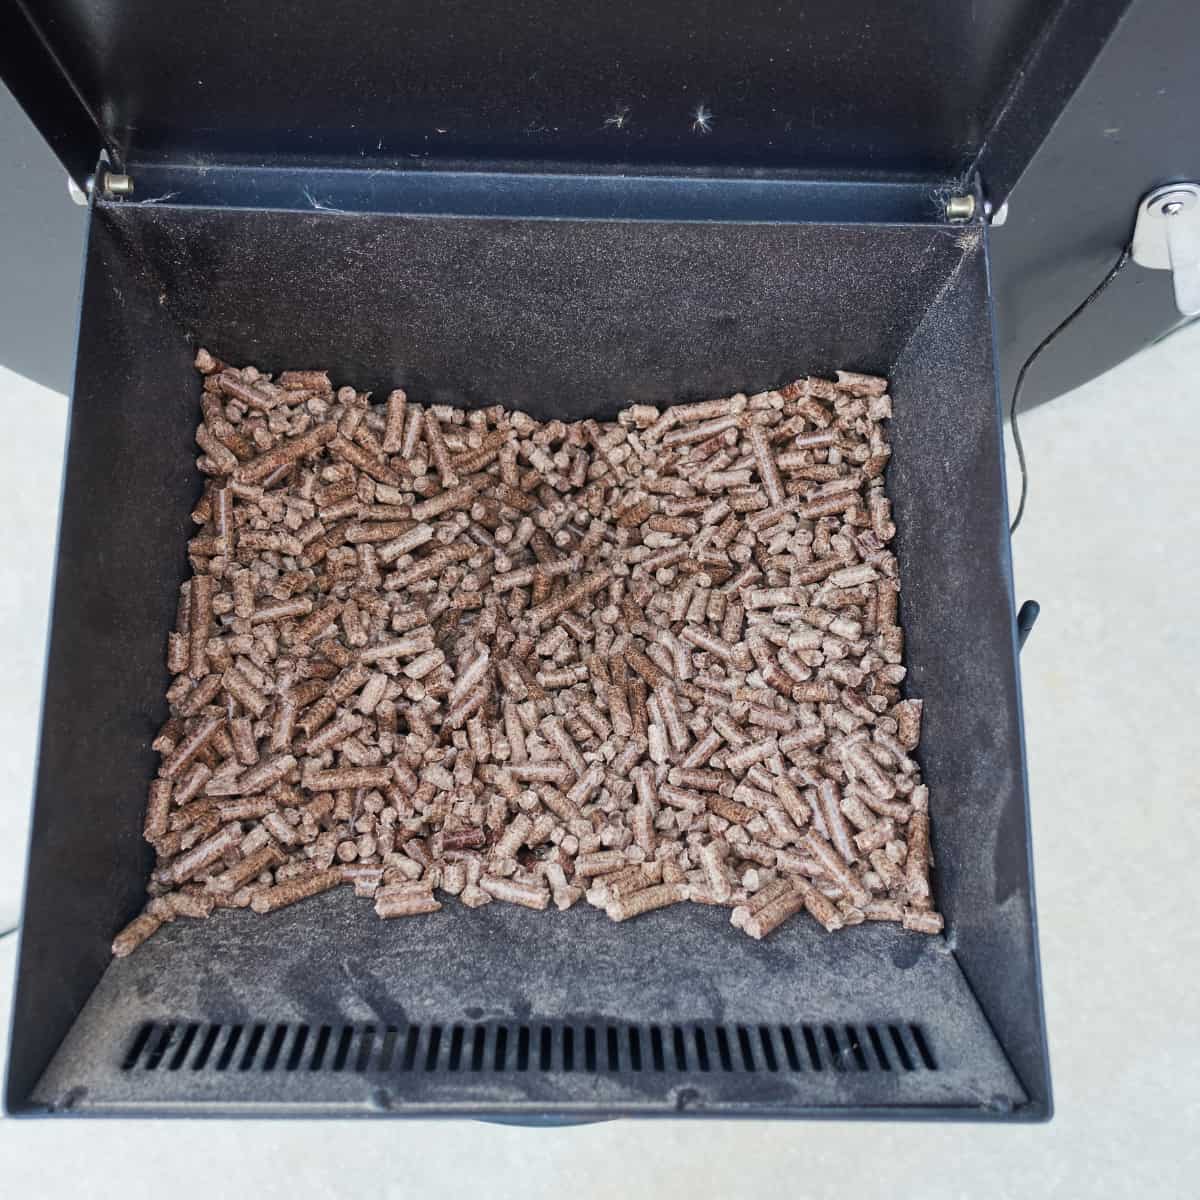 What is a pellet smoker